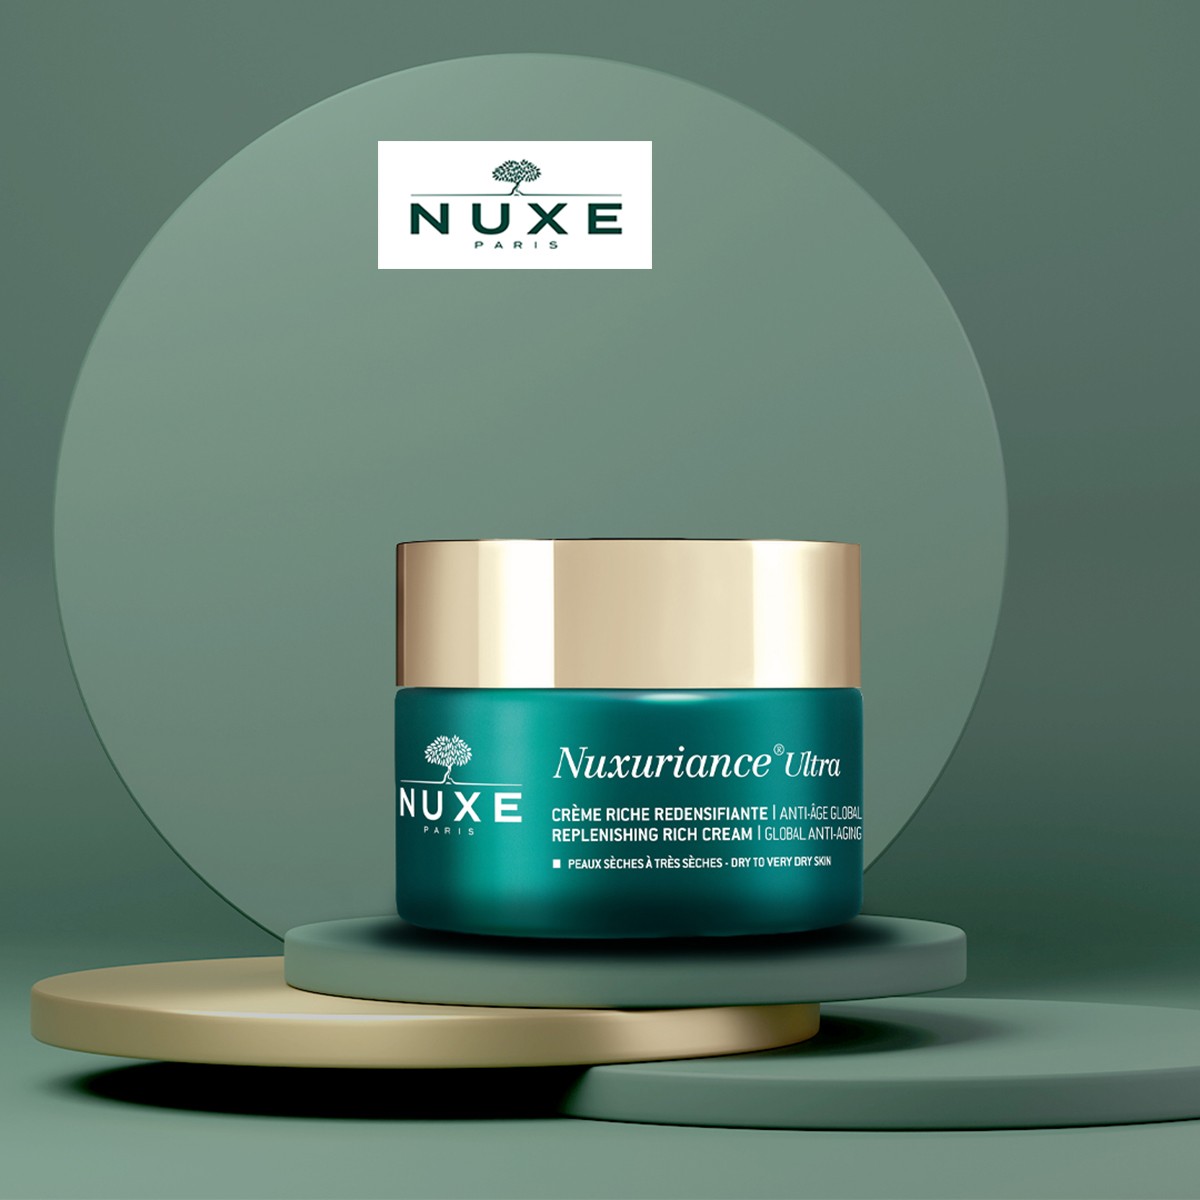 NUXE Nuxuriance Ultra